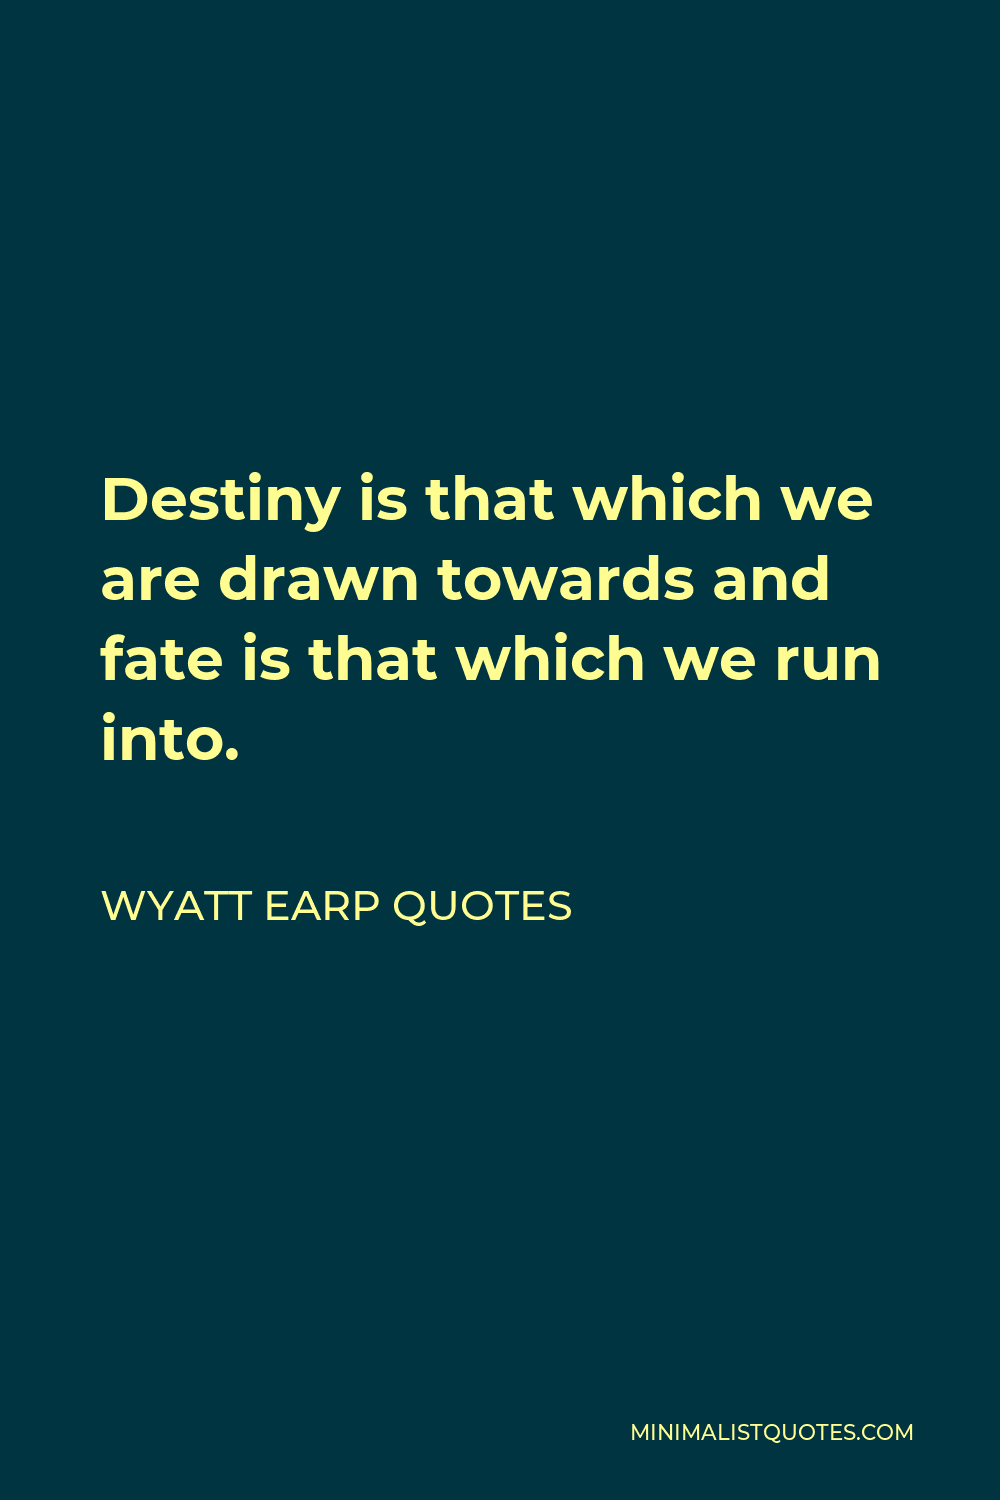 Wyatt Earp Quotes Quote - Destiny is that which we are drawn towards and fate is that which we run into.